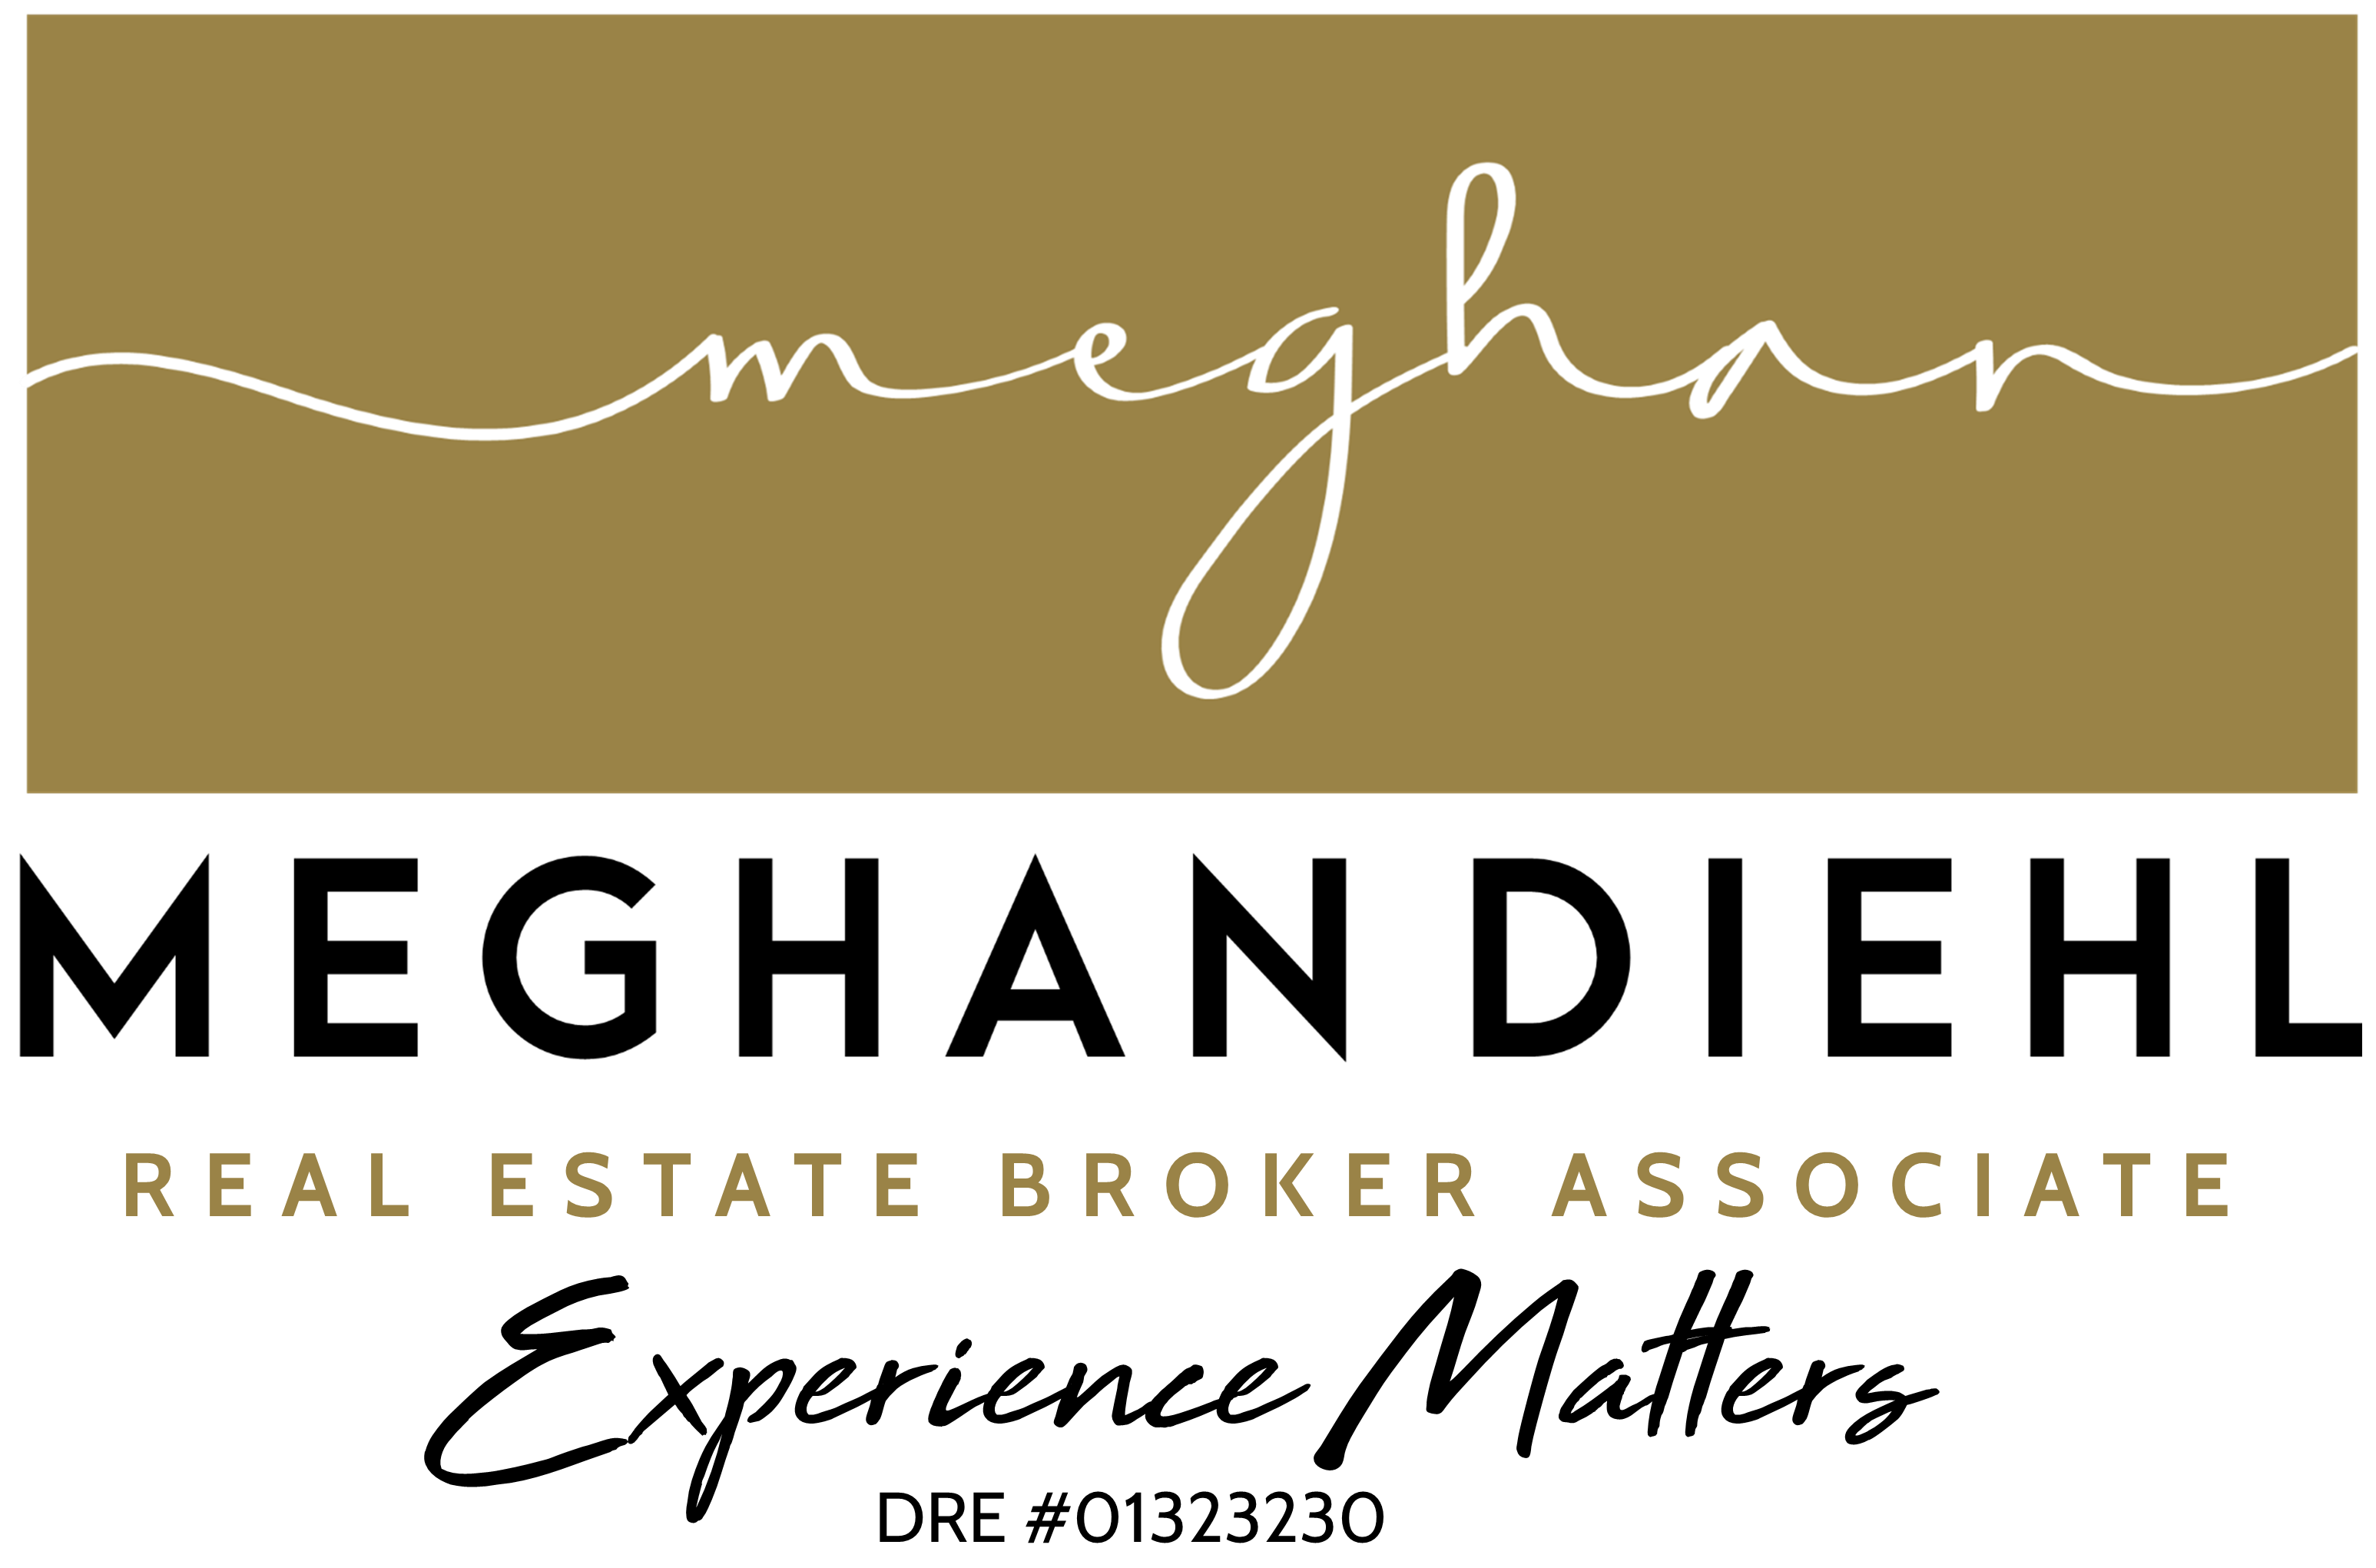 Meghan Diehl of Keller Williams Realty Discusses Key Changes to The Bay Area Real Estate Market